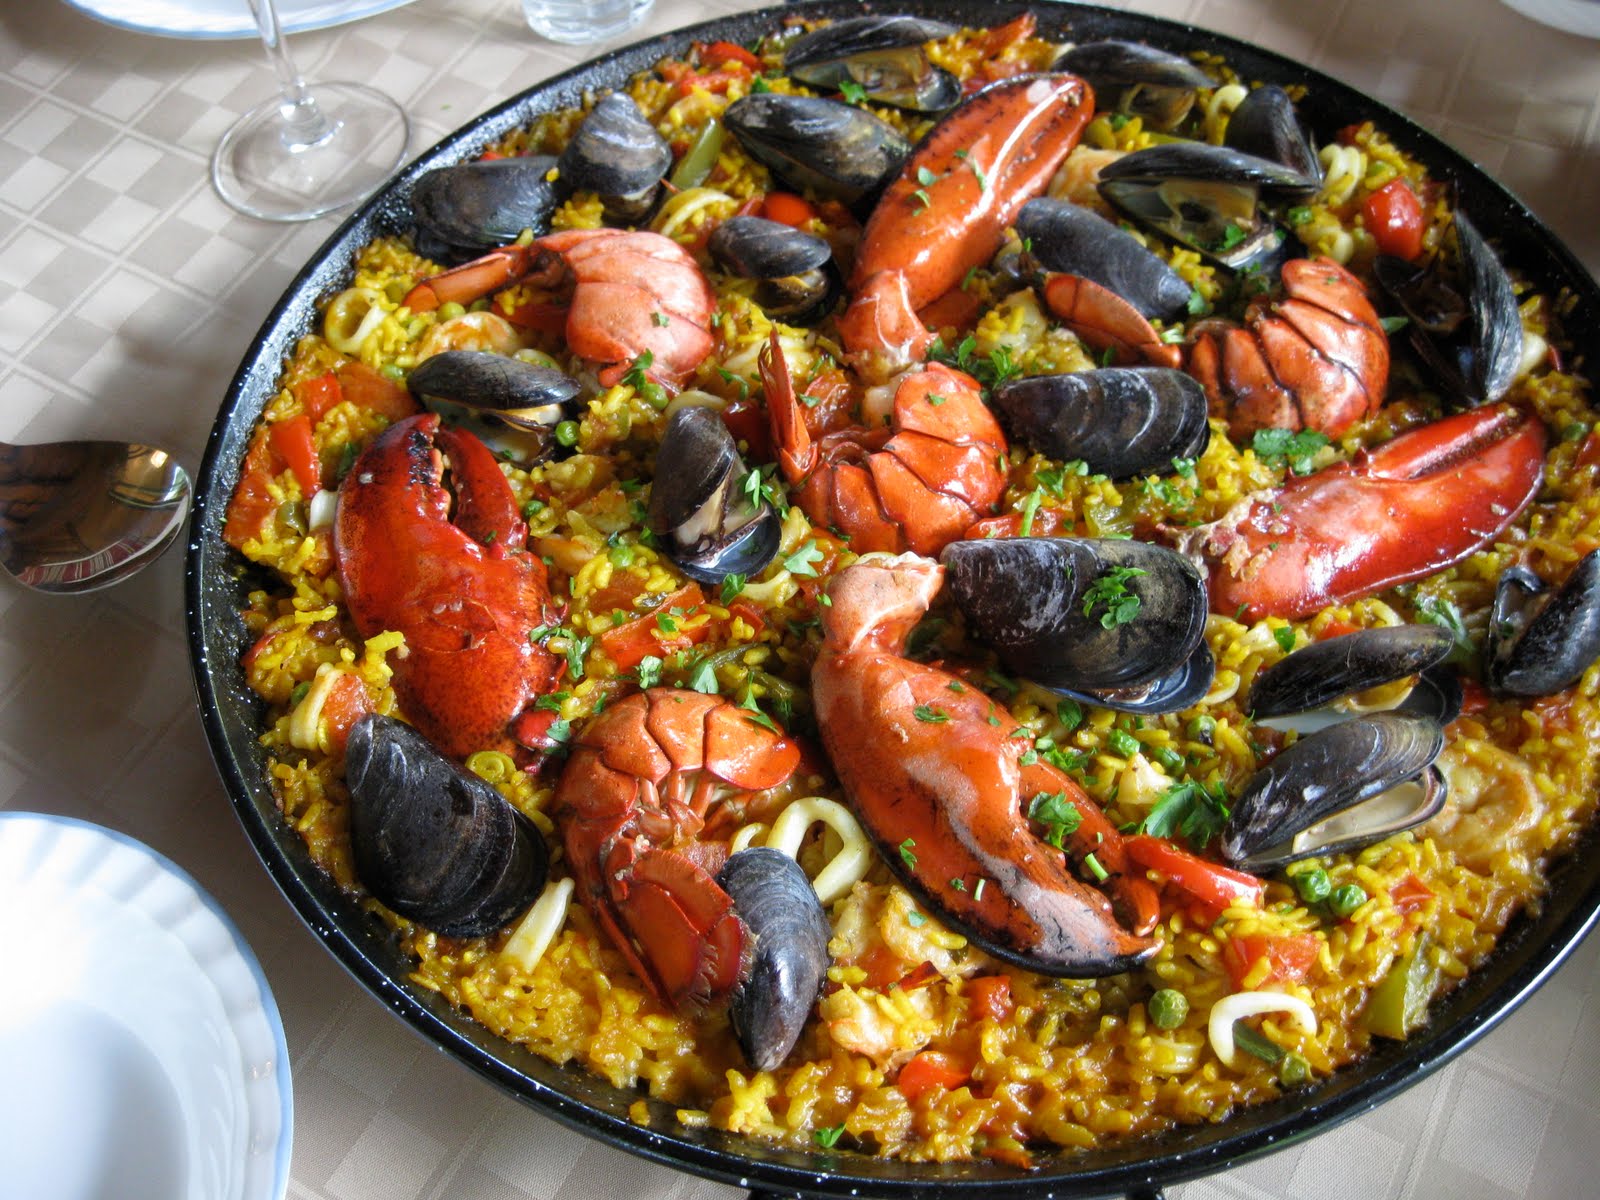 Eat at an Endless Buffet & We'll Guess Your Age & Gender Quiz Seafood paella